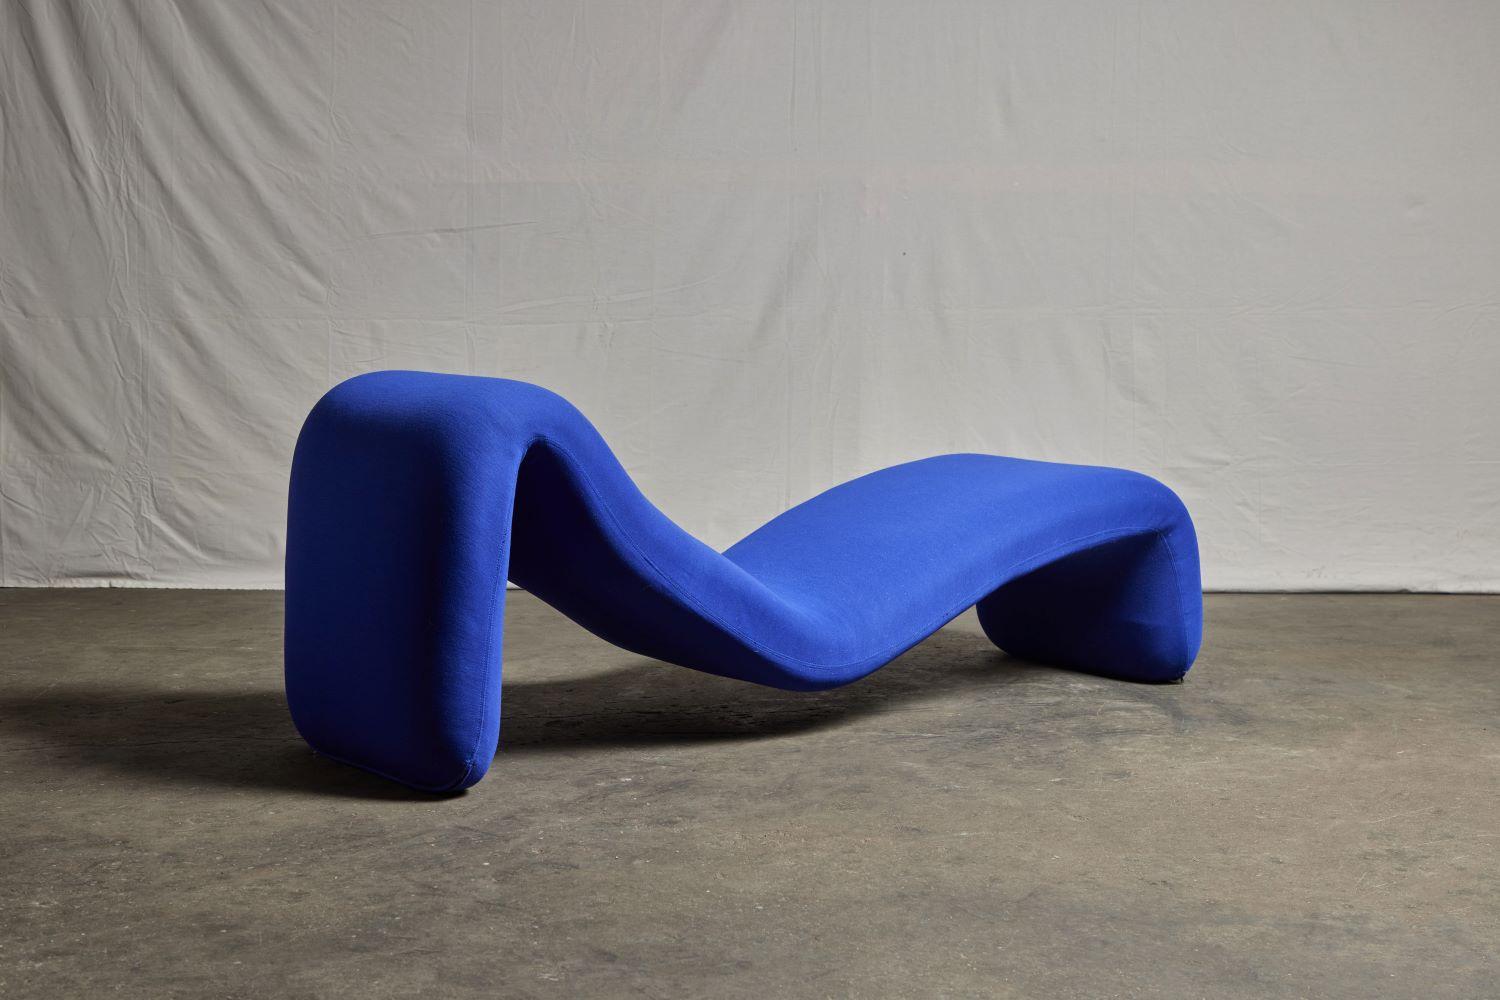 Mid-20th Century Olivier Mourgue, Chaise Lounge 